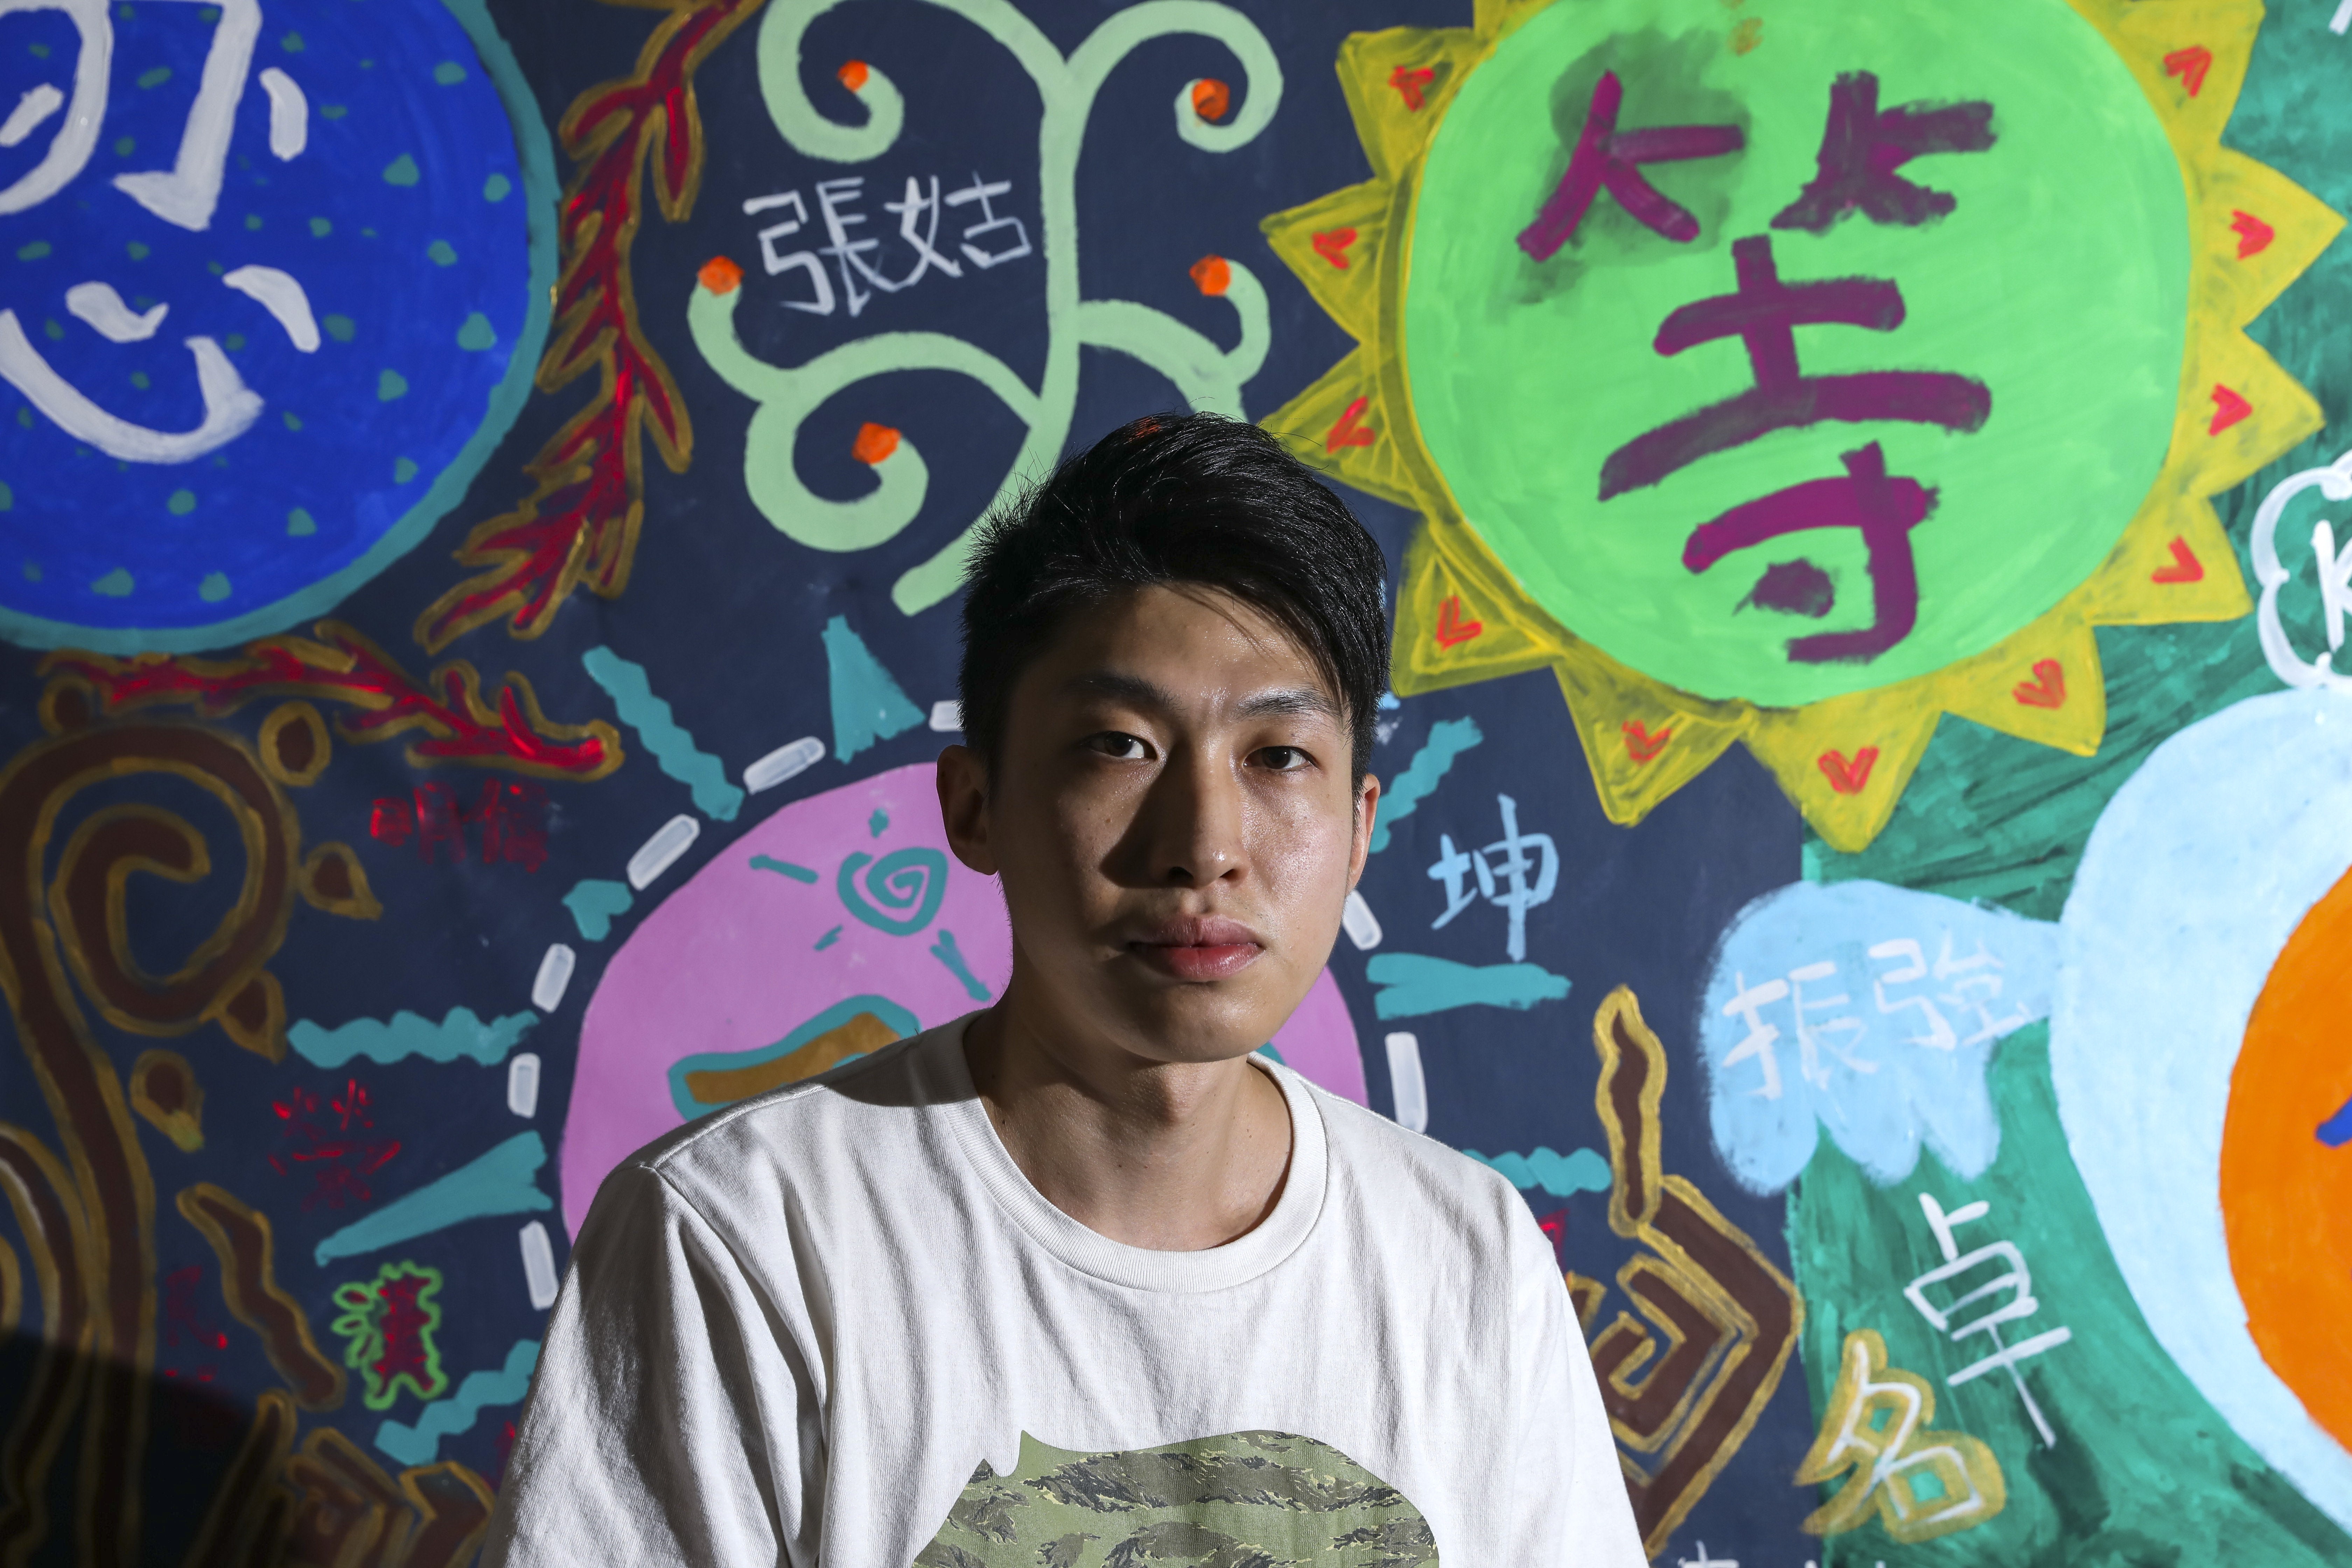 Leung Chun-wing is hoping young people will learn from his experiences of taking drugs. Photo: K.Y. Cheng